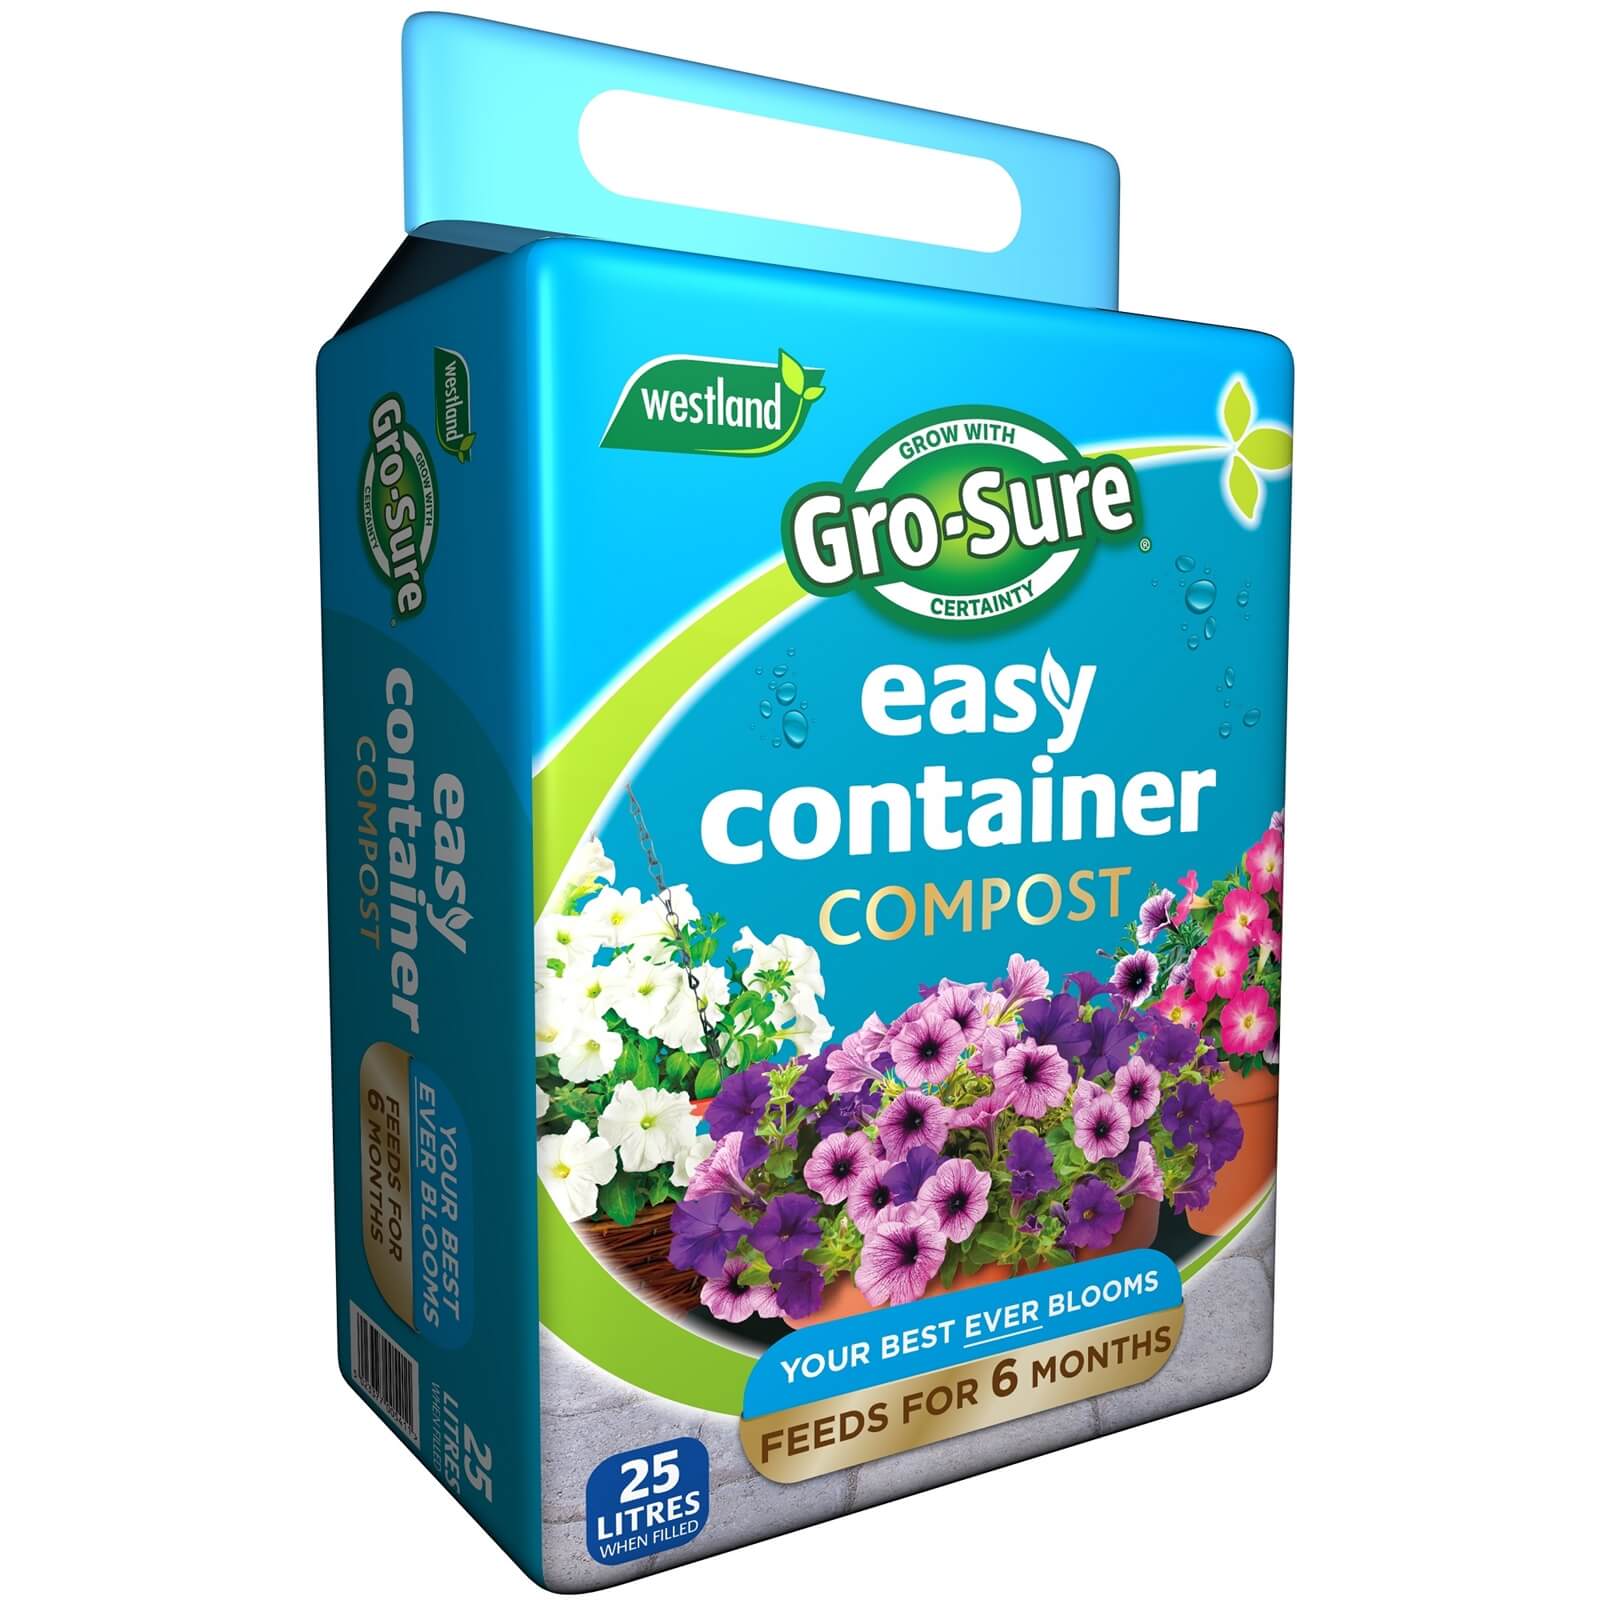 Gro-sure Easy Container Compost - 25L